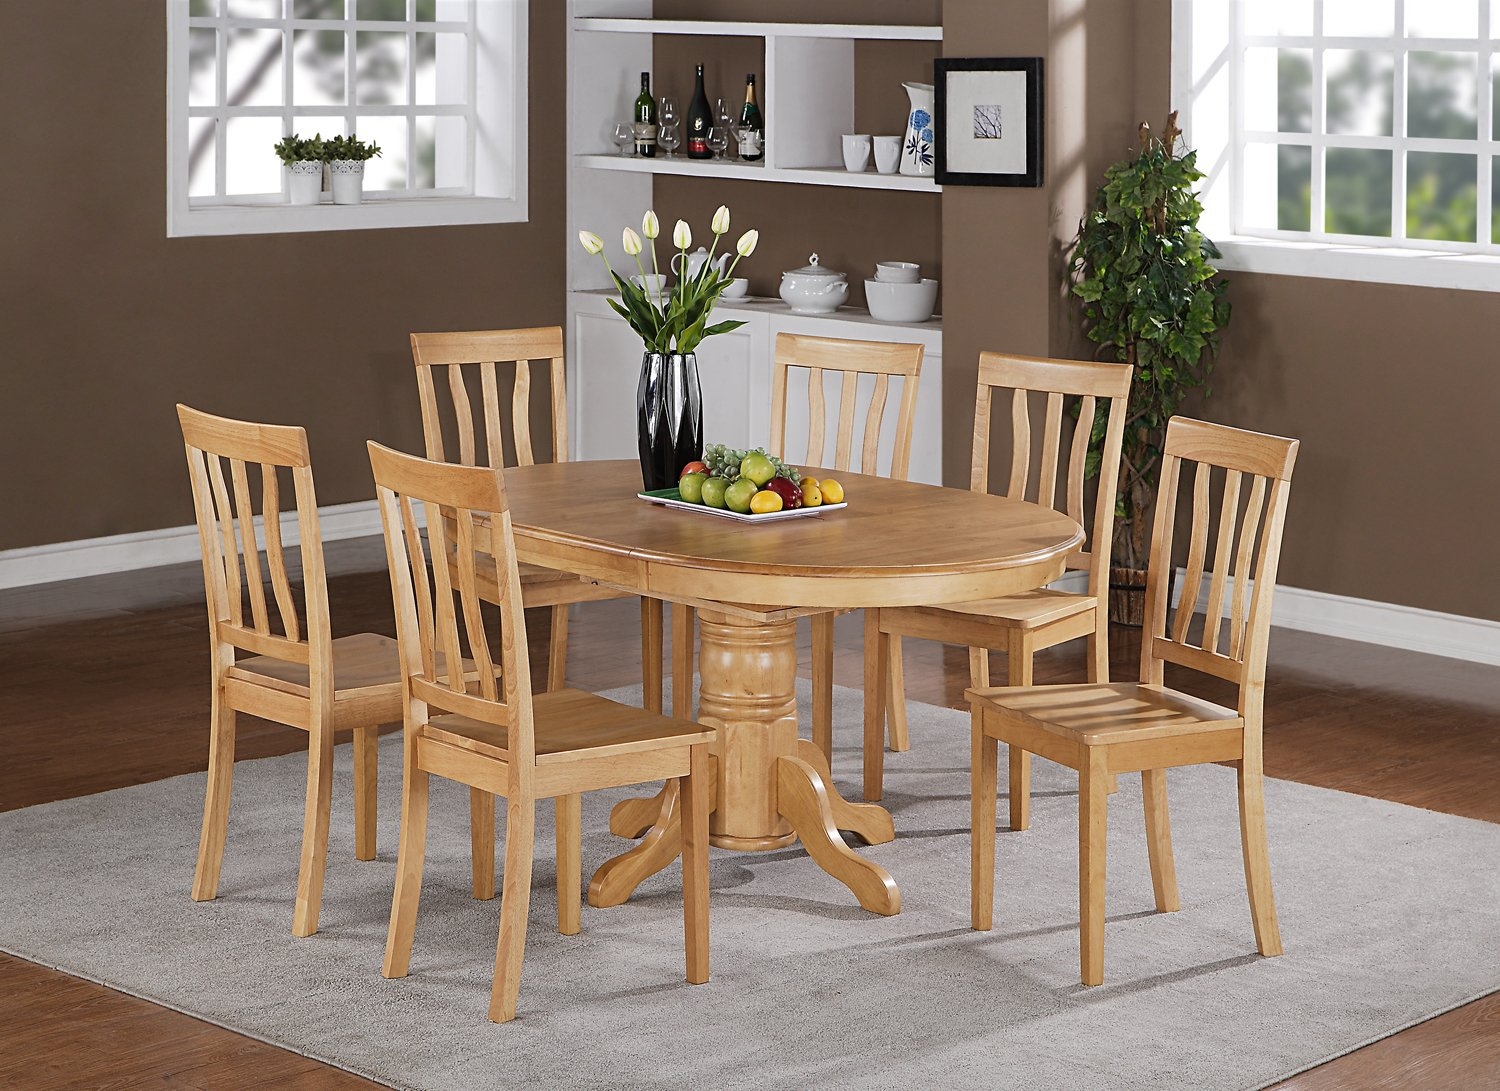 Details about avon oval dinette kitchen dining table without chair